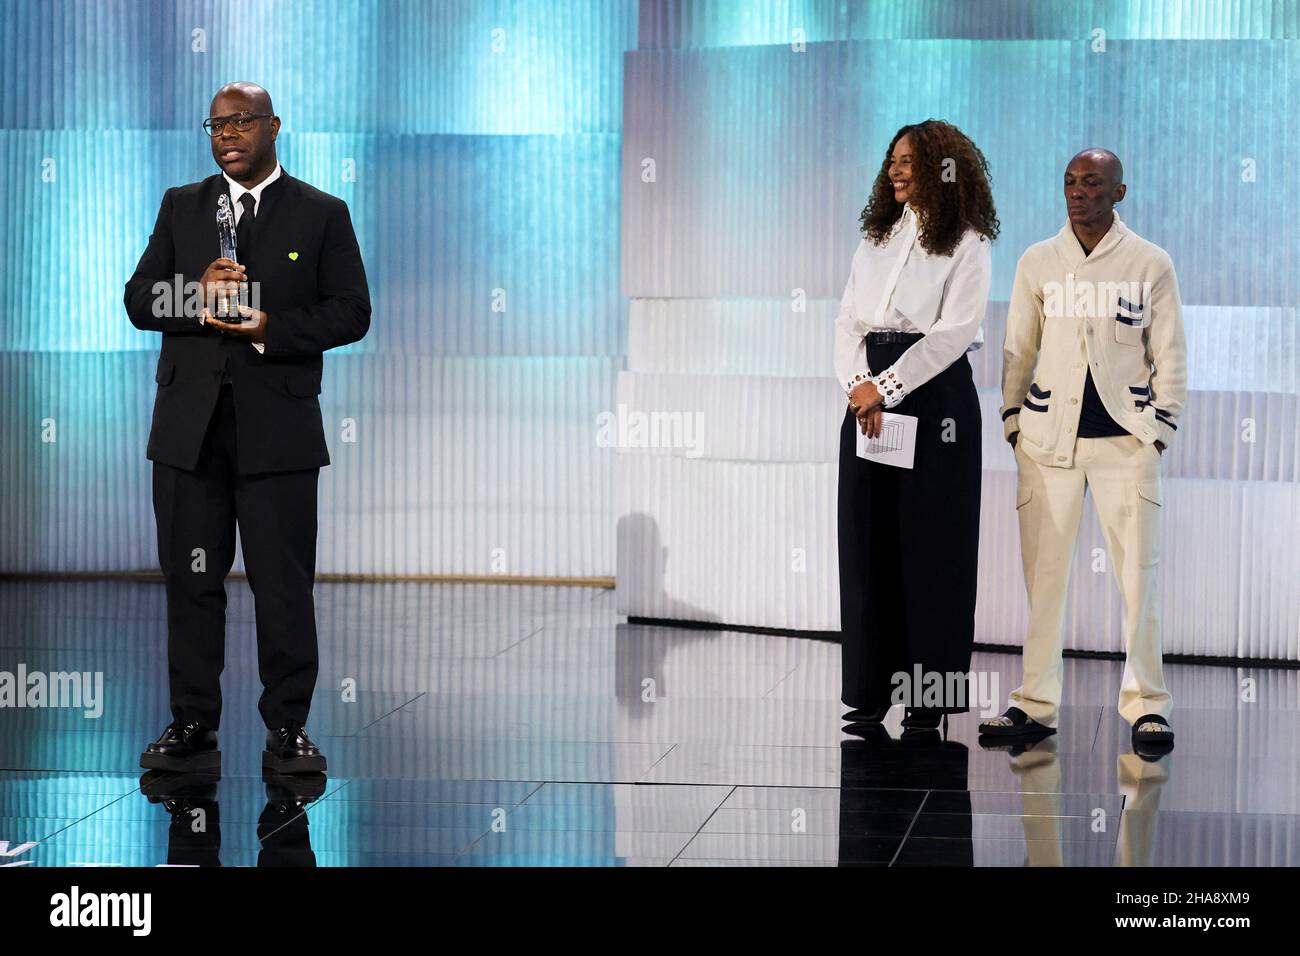 Berlin, Germany. 11th Dec, 2021. Steve McQueen (l) receives the award for innovative storytelling for 'Small Axe' at the 34th European Film Awards. The European Film Academy presents the awards in Berlin. Joy Denalane is on stage in the middle. Credit: Christian Mang/Reuters/Pool/dpa/Alamy Live News Stock Photo